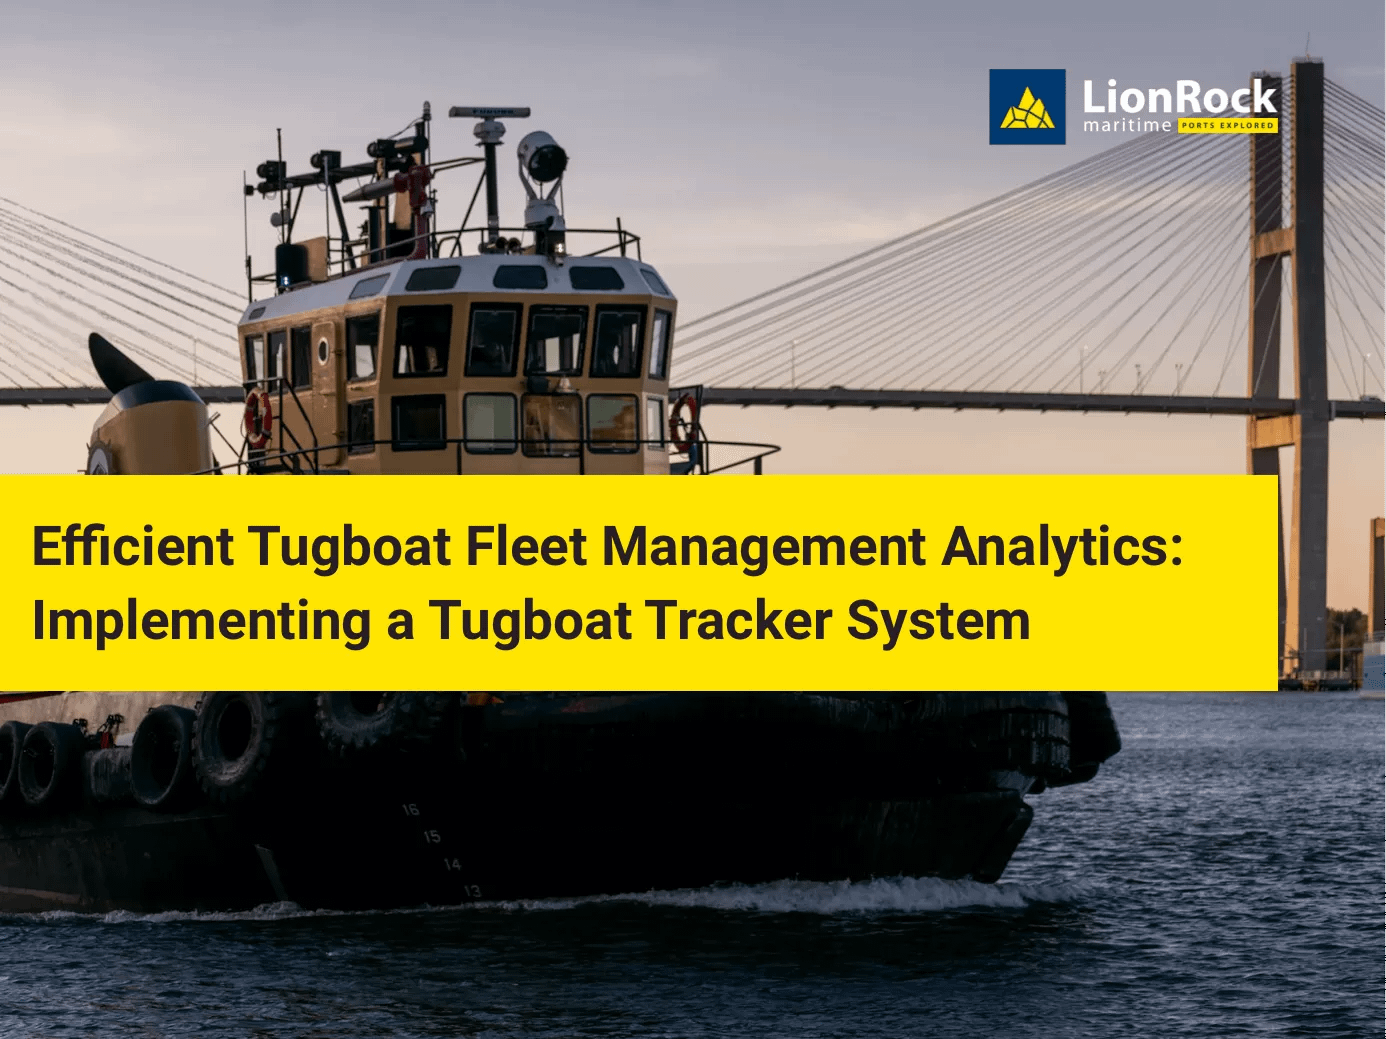 Efficient Tugboat Fleet Management Analytics: Implementing a Tugboat Tracker System